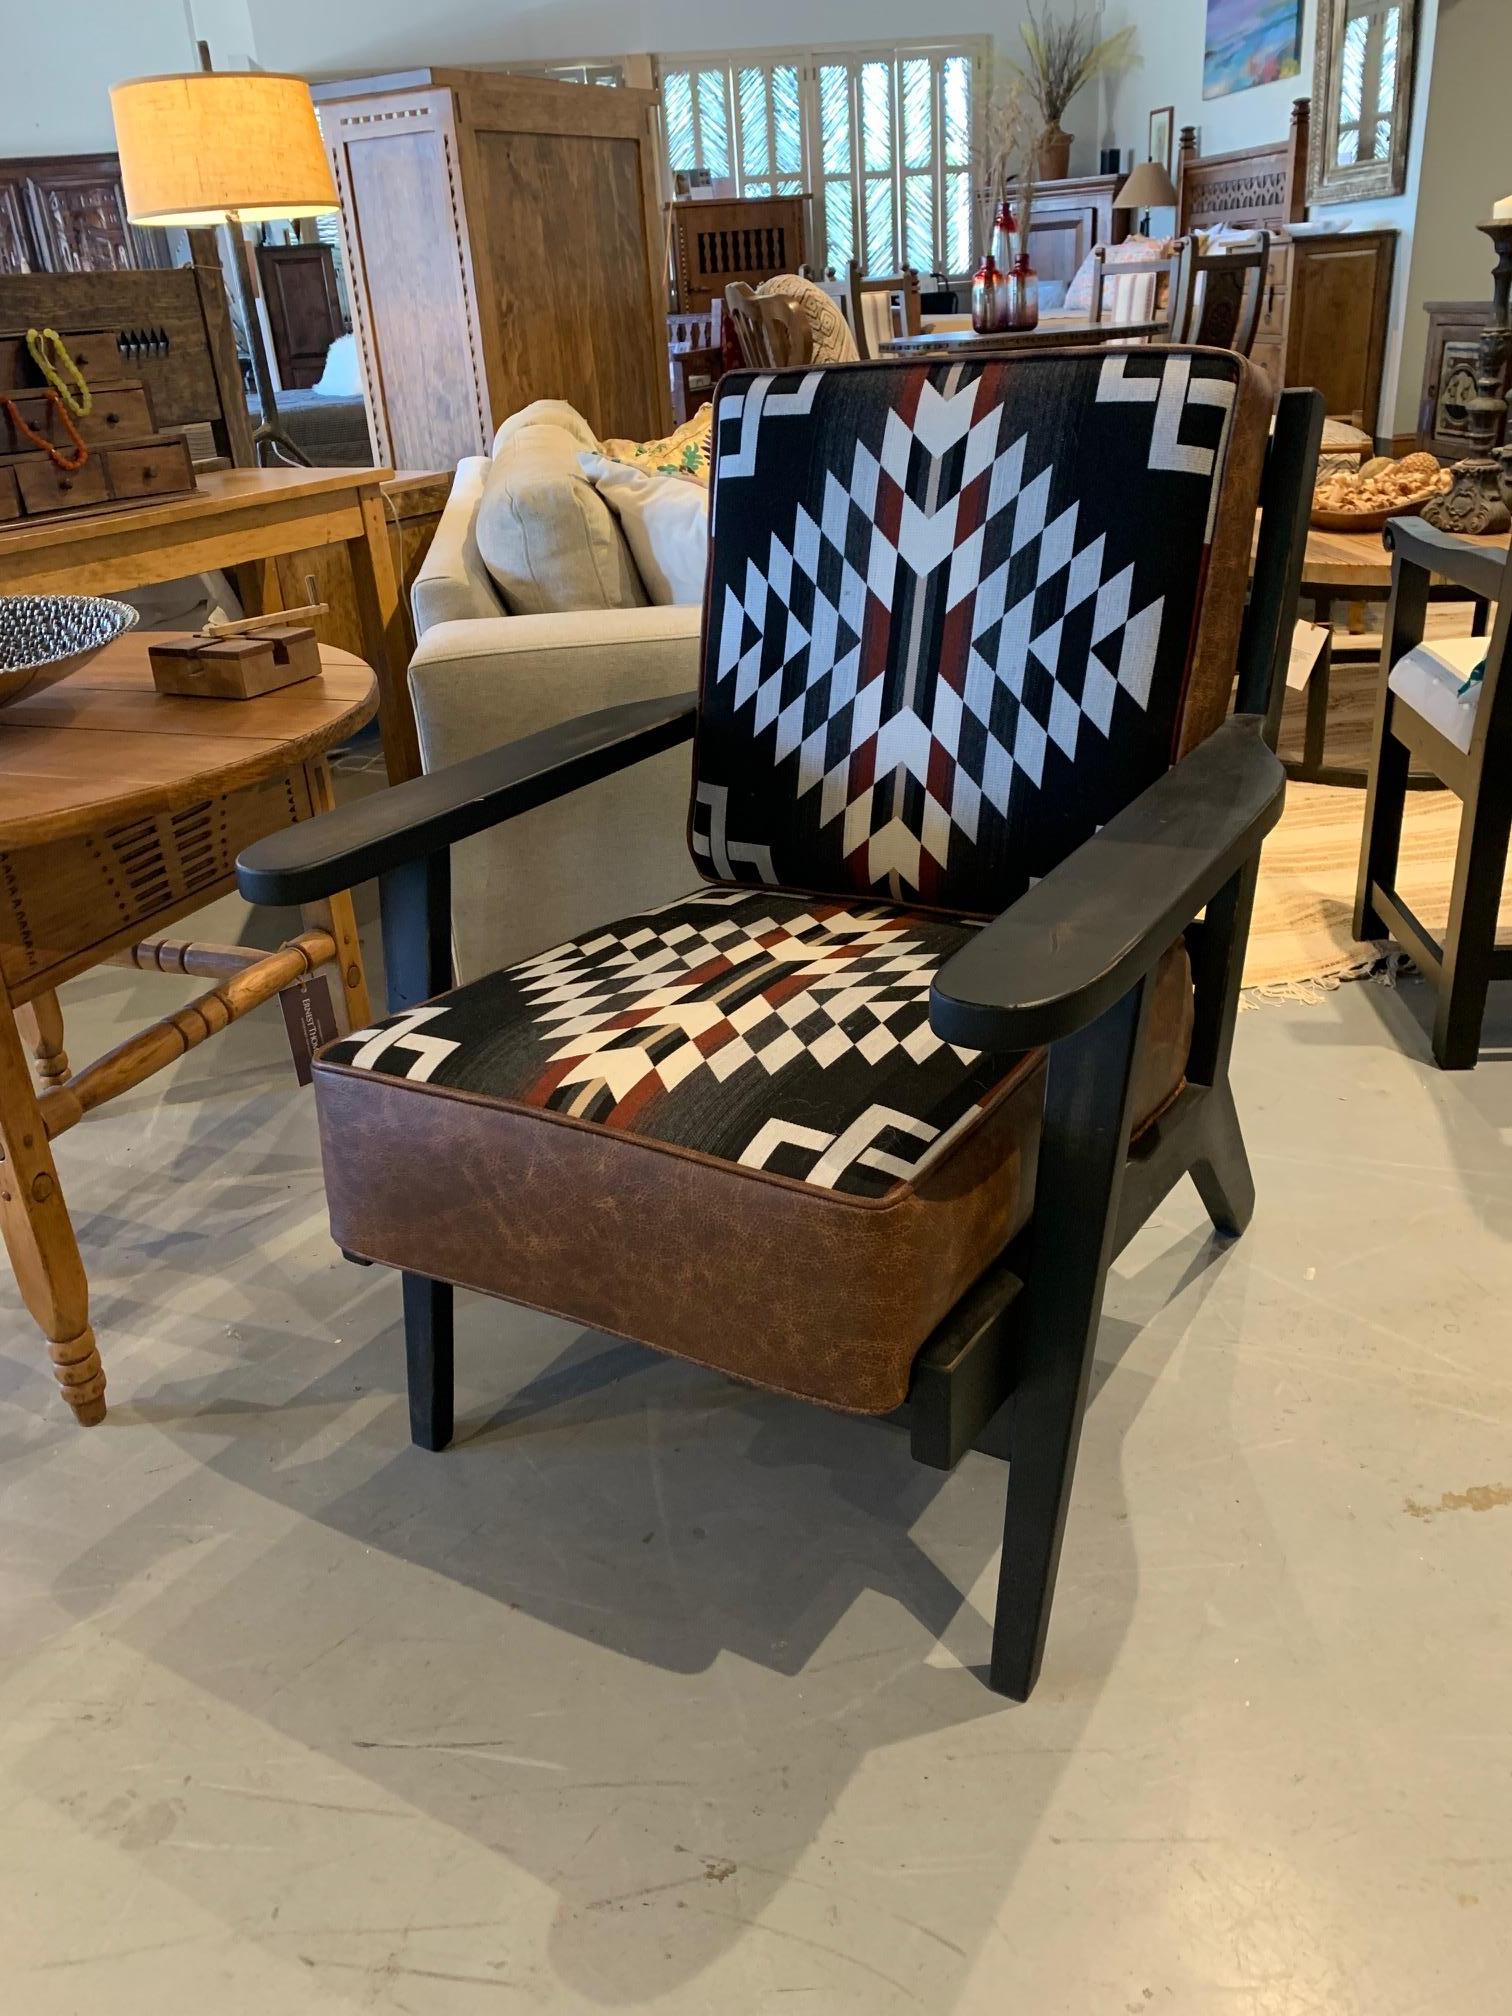 Custom Ernest Thompson Julie Lounge Chair.
Made in Alder with a black scraped finish.
Custom upholstery.

This is a showroom floor model in perfect condition.